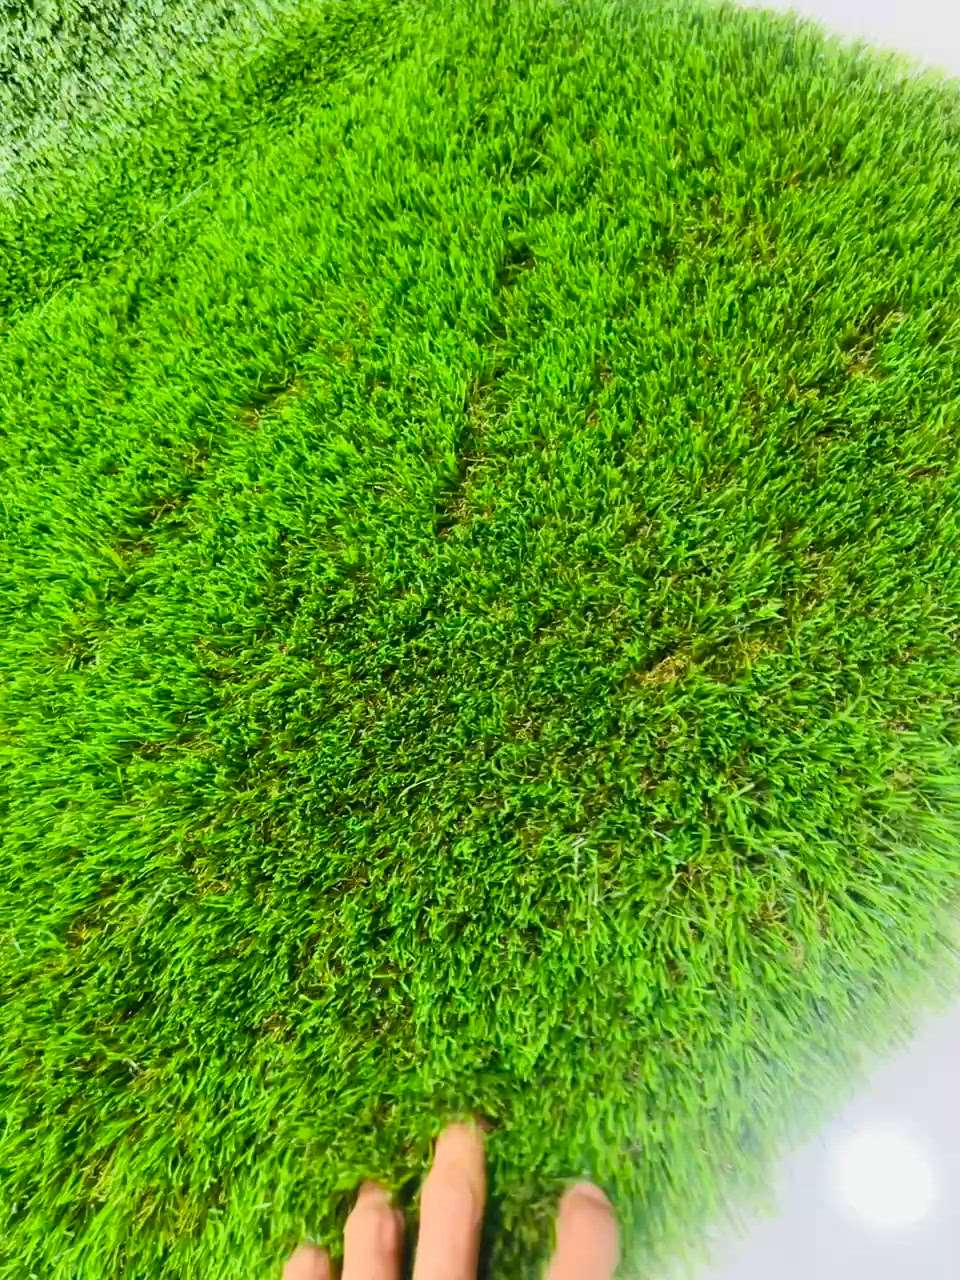 Greenwall Artificial Vertical Garden and Artificial Grass

Chinese Quality  Vertical Garden Rs 120 to 200 per sq ft

Greenwall Premium Pu Polyethylene Rubber finish Product Rs 270 to 350 Range

Greenwall Premium 1 mtr by 1 mtr  pu polyethylene rubber finish Product Rs 420 to Rs 580 Range

Artificial Grass Price ranging from Rs 35 to Rs 120

Our Product 100 percent Genuine Quality